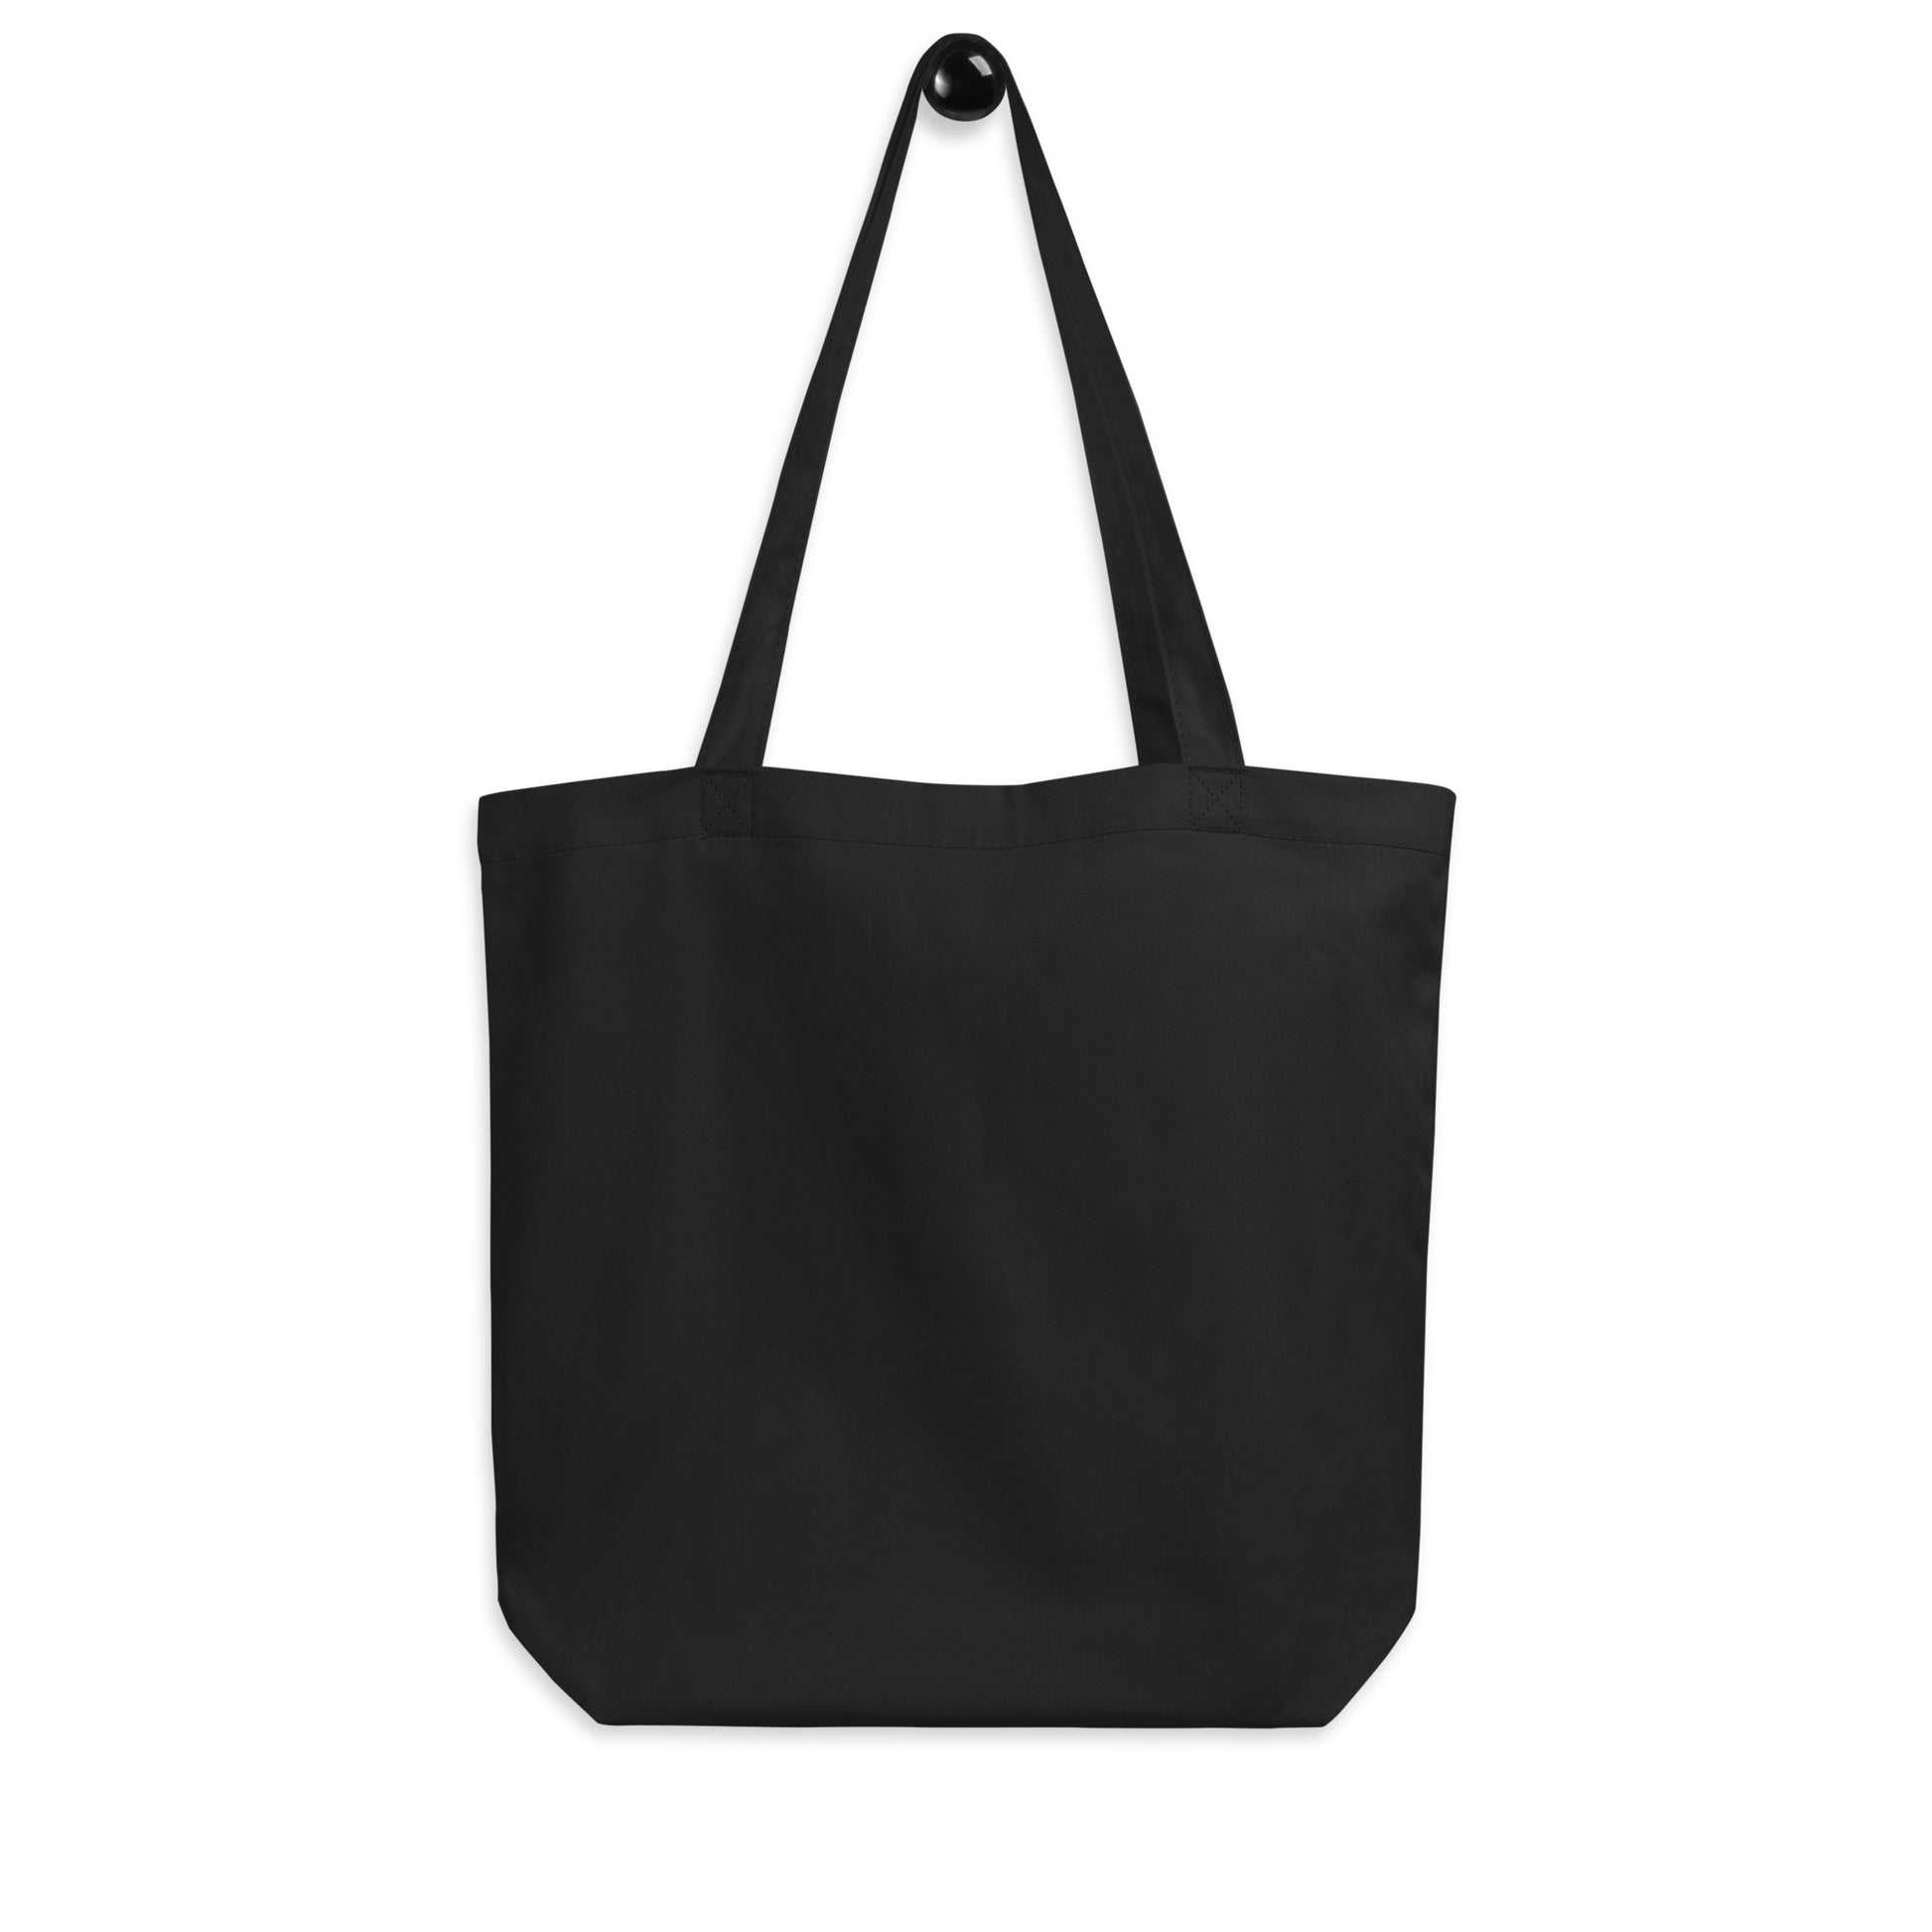 Unique Travel Gift Organic Tote - White Oval • HNL Honolulu • YHM Designs - Image 05